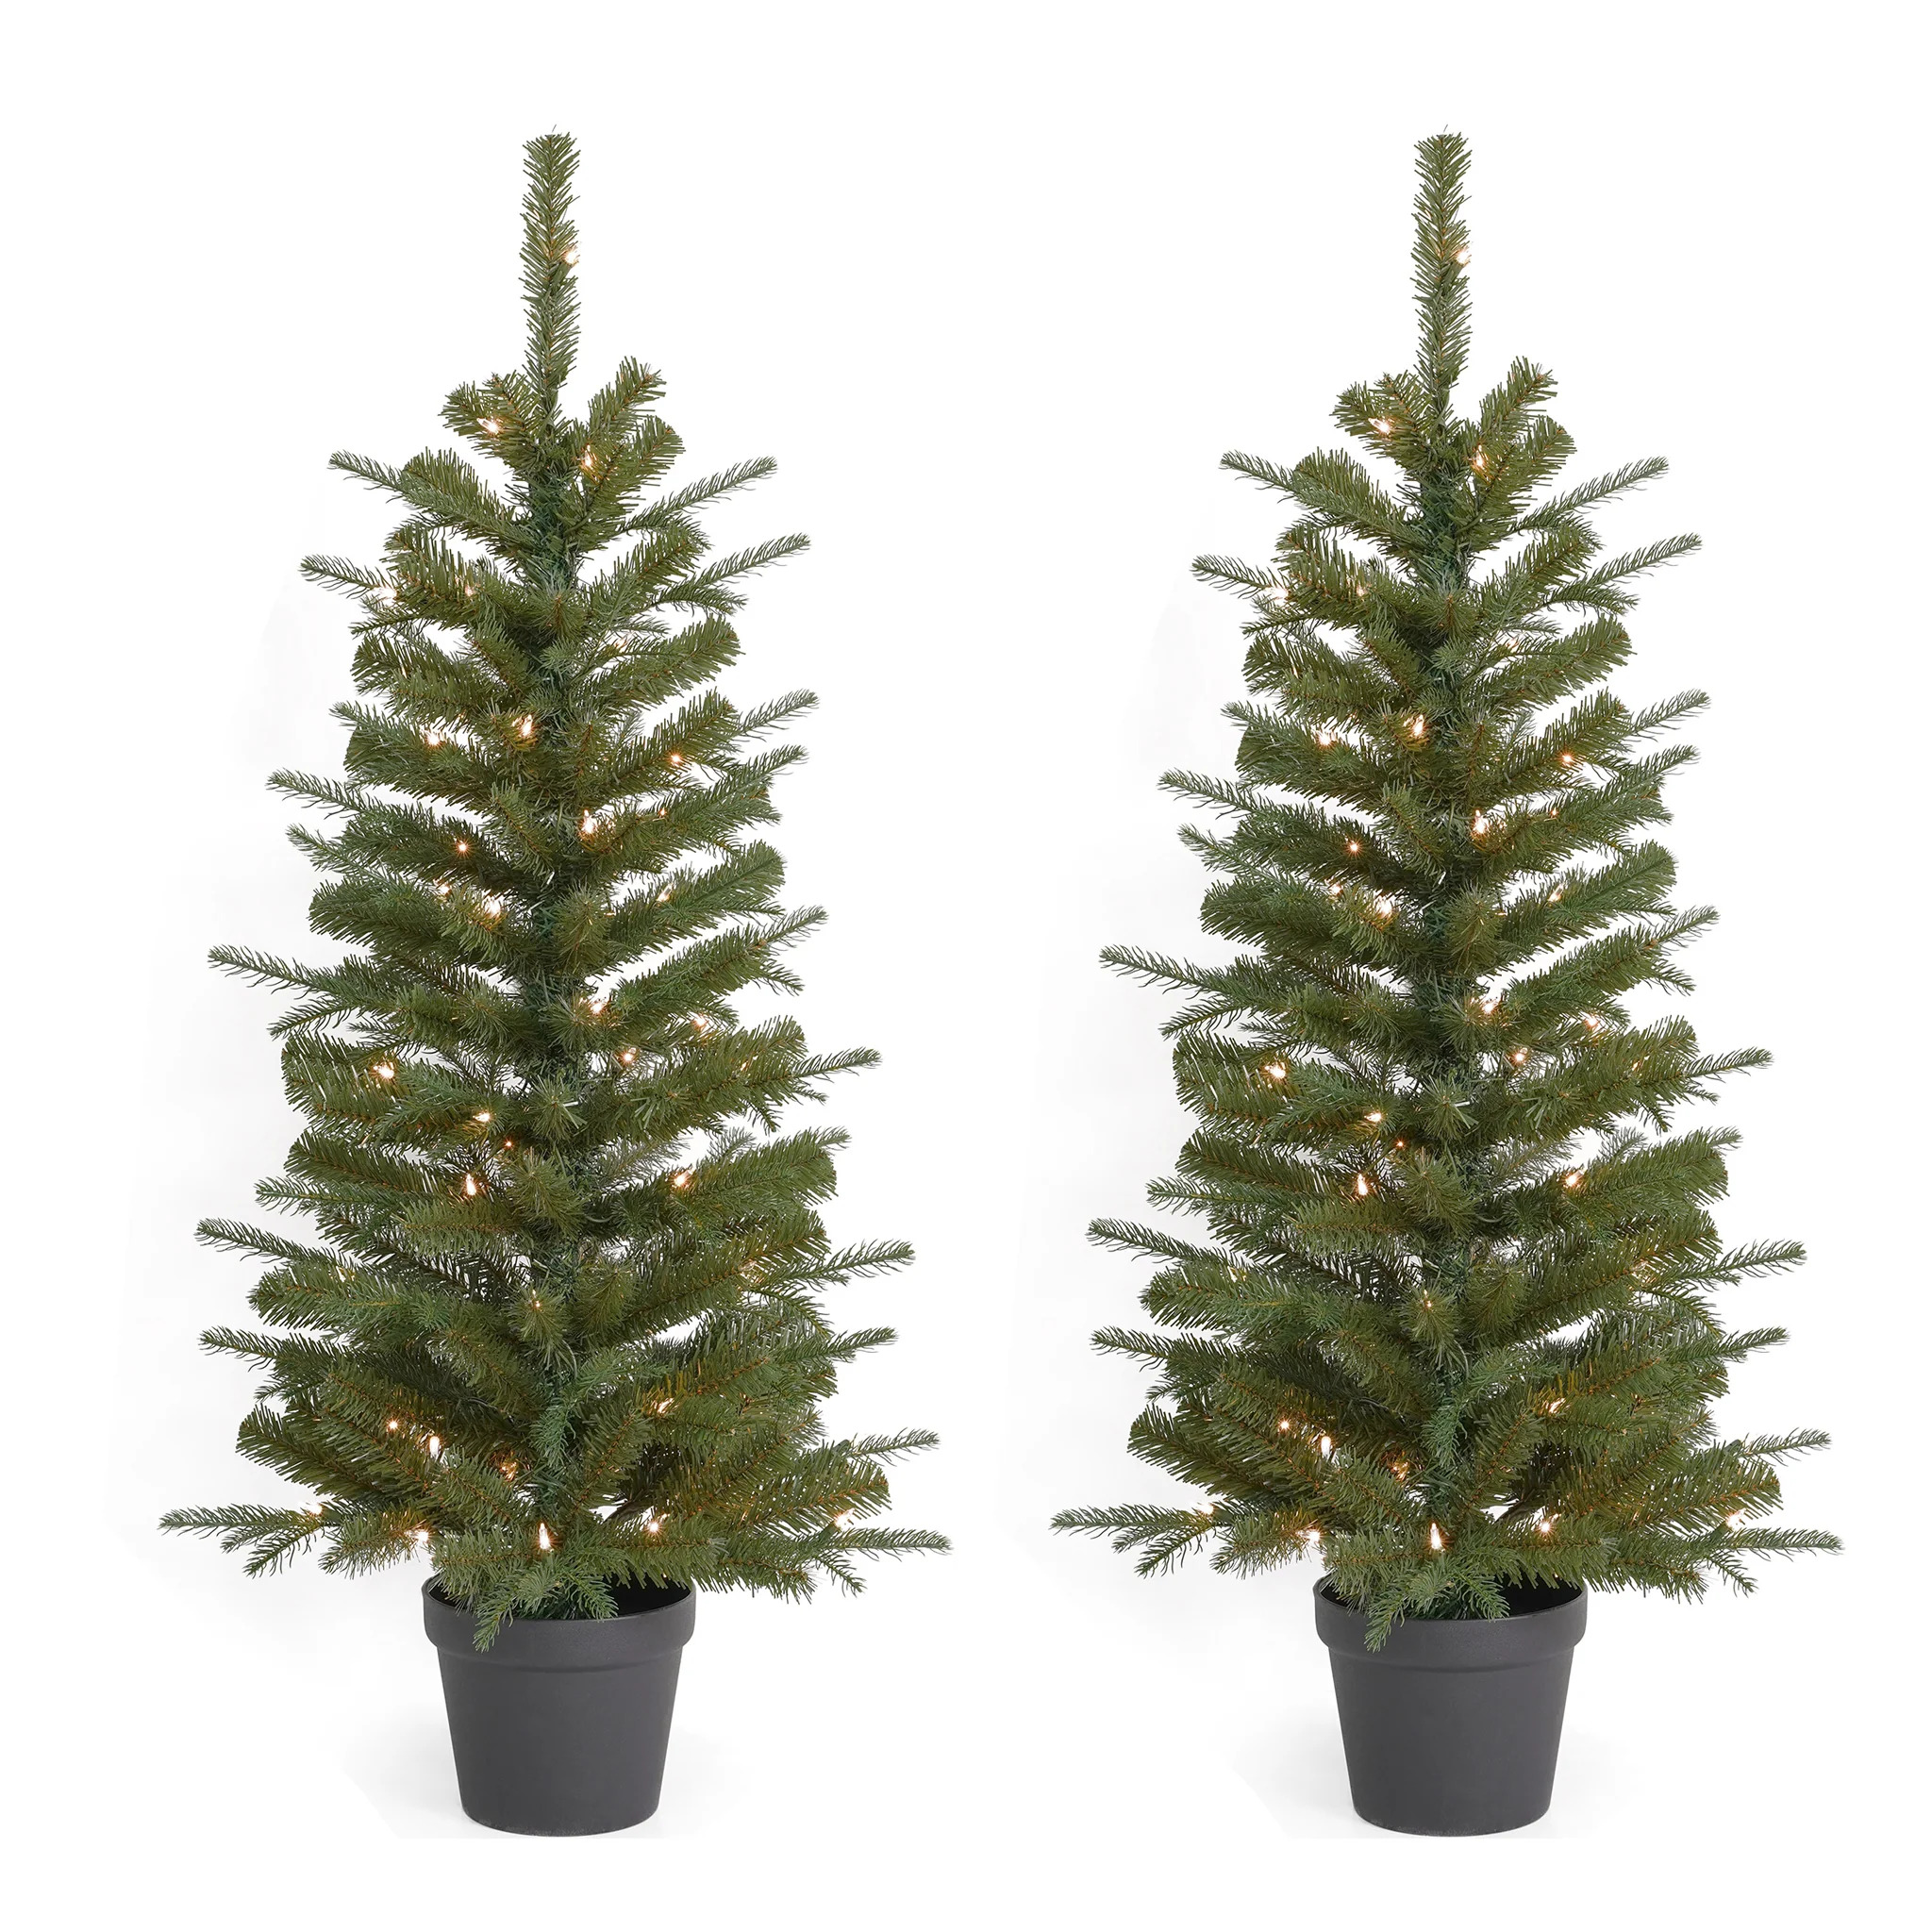 4ft Valley Pine Porch Tree (Set of 2) Each Tree is Pre-Lit with 50 UL Clear Lights by Seasonal LLC - image 1 of 4